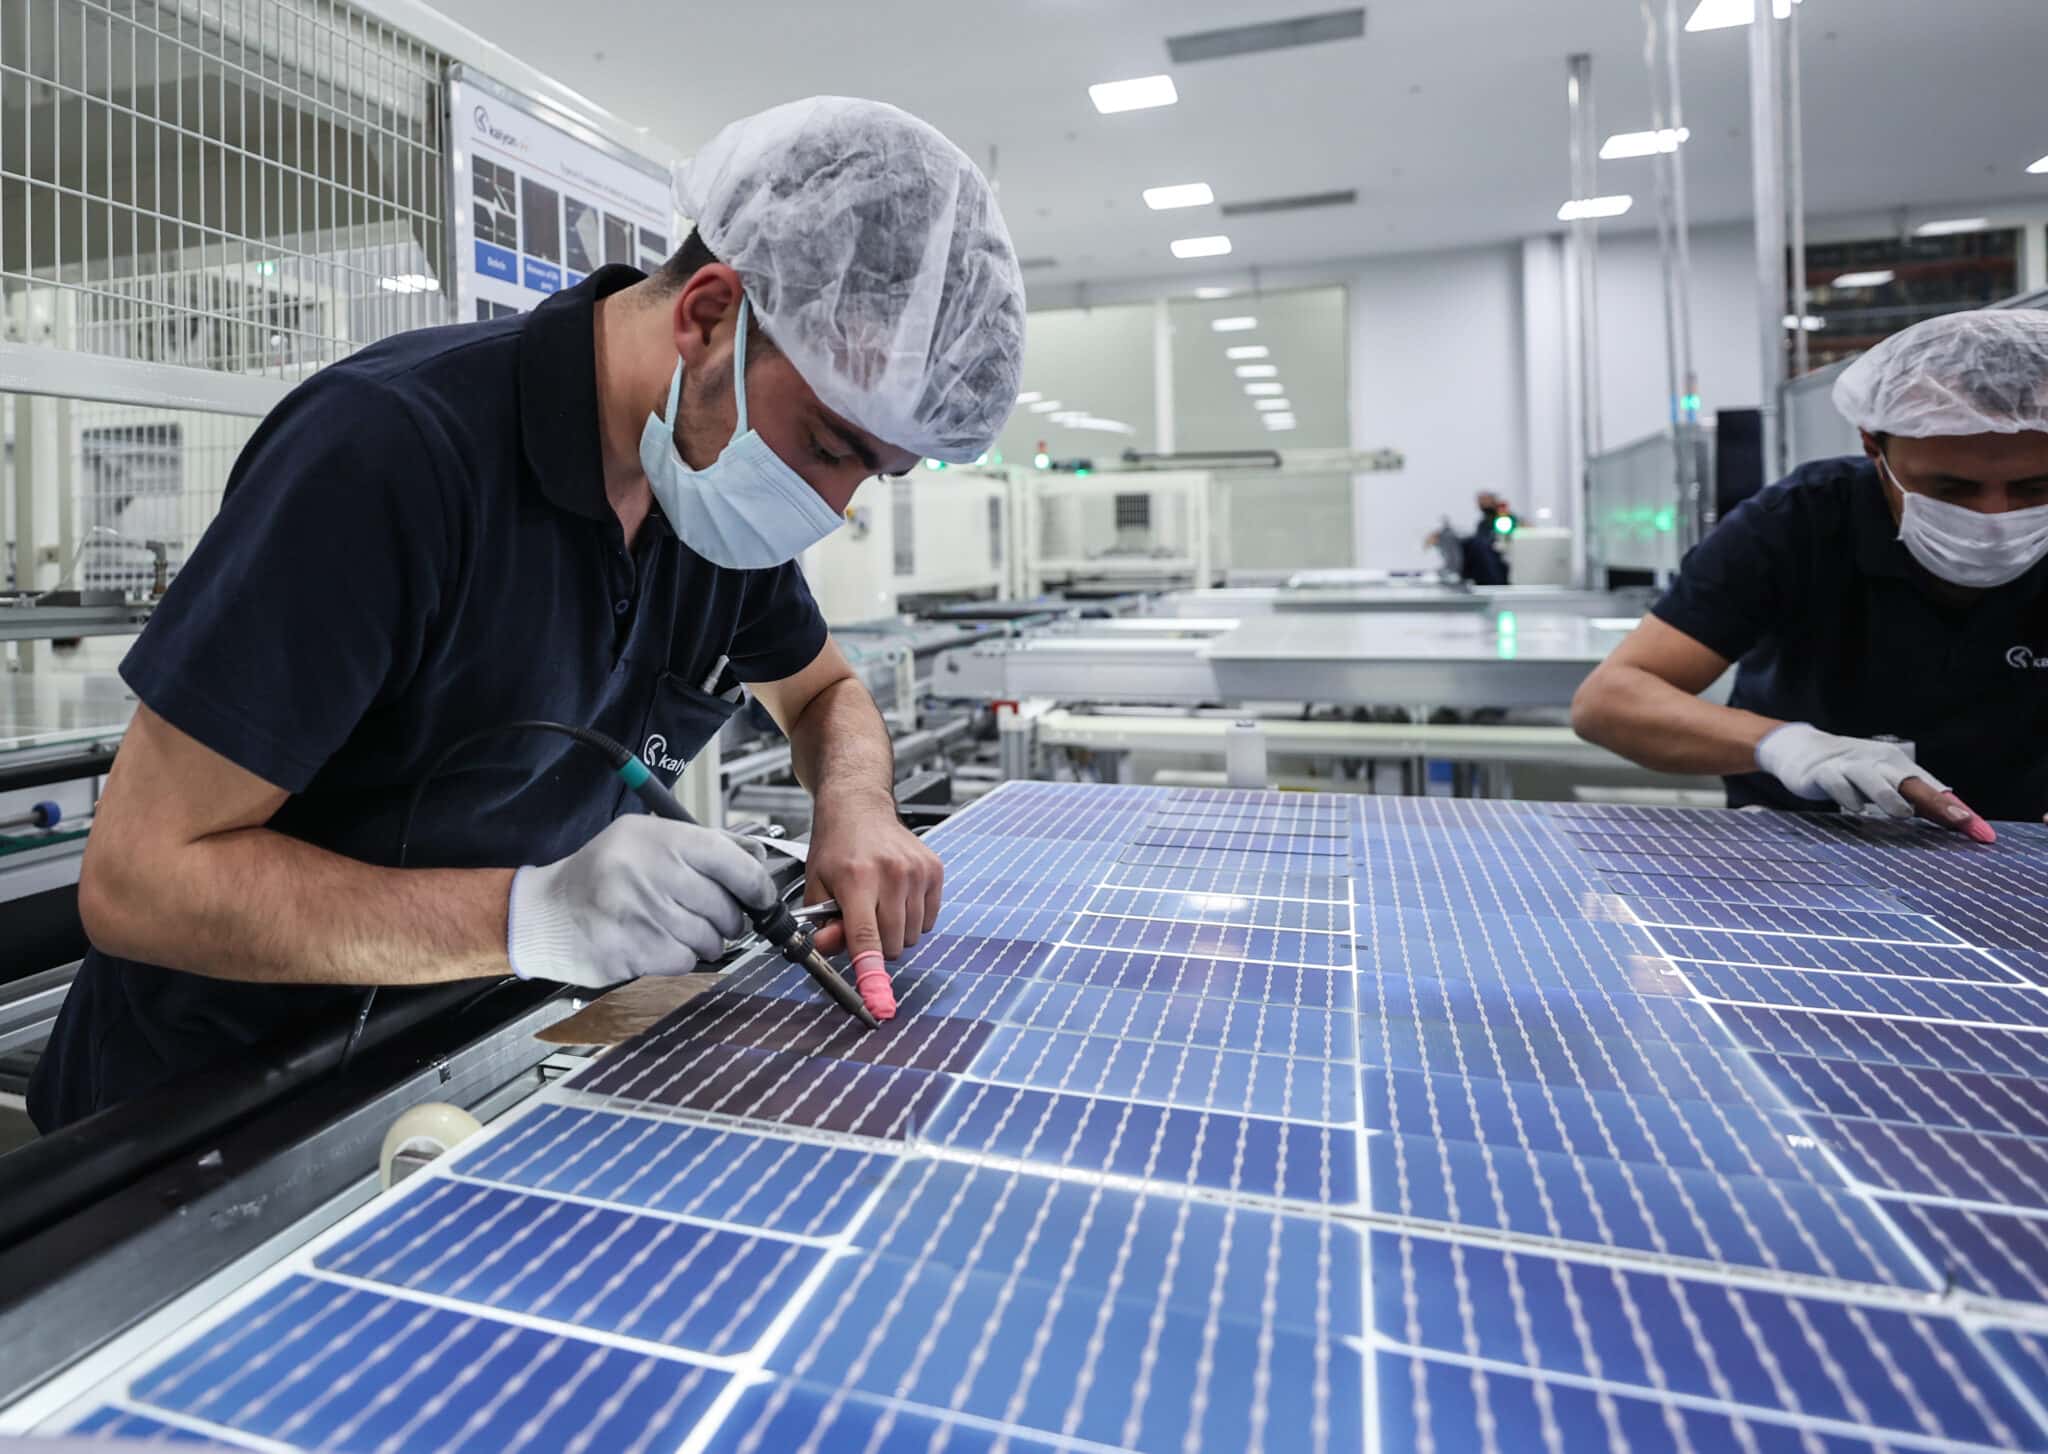 Solar panel production facility with worker working on solar panel manufacturing